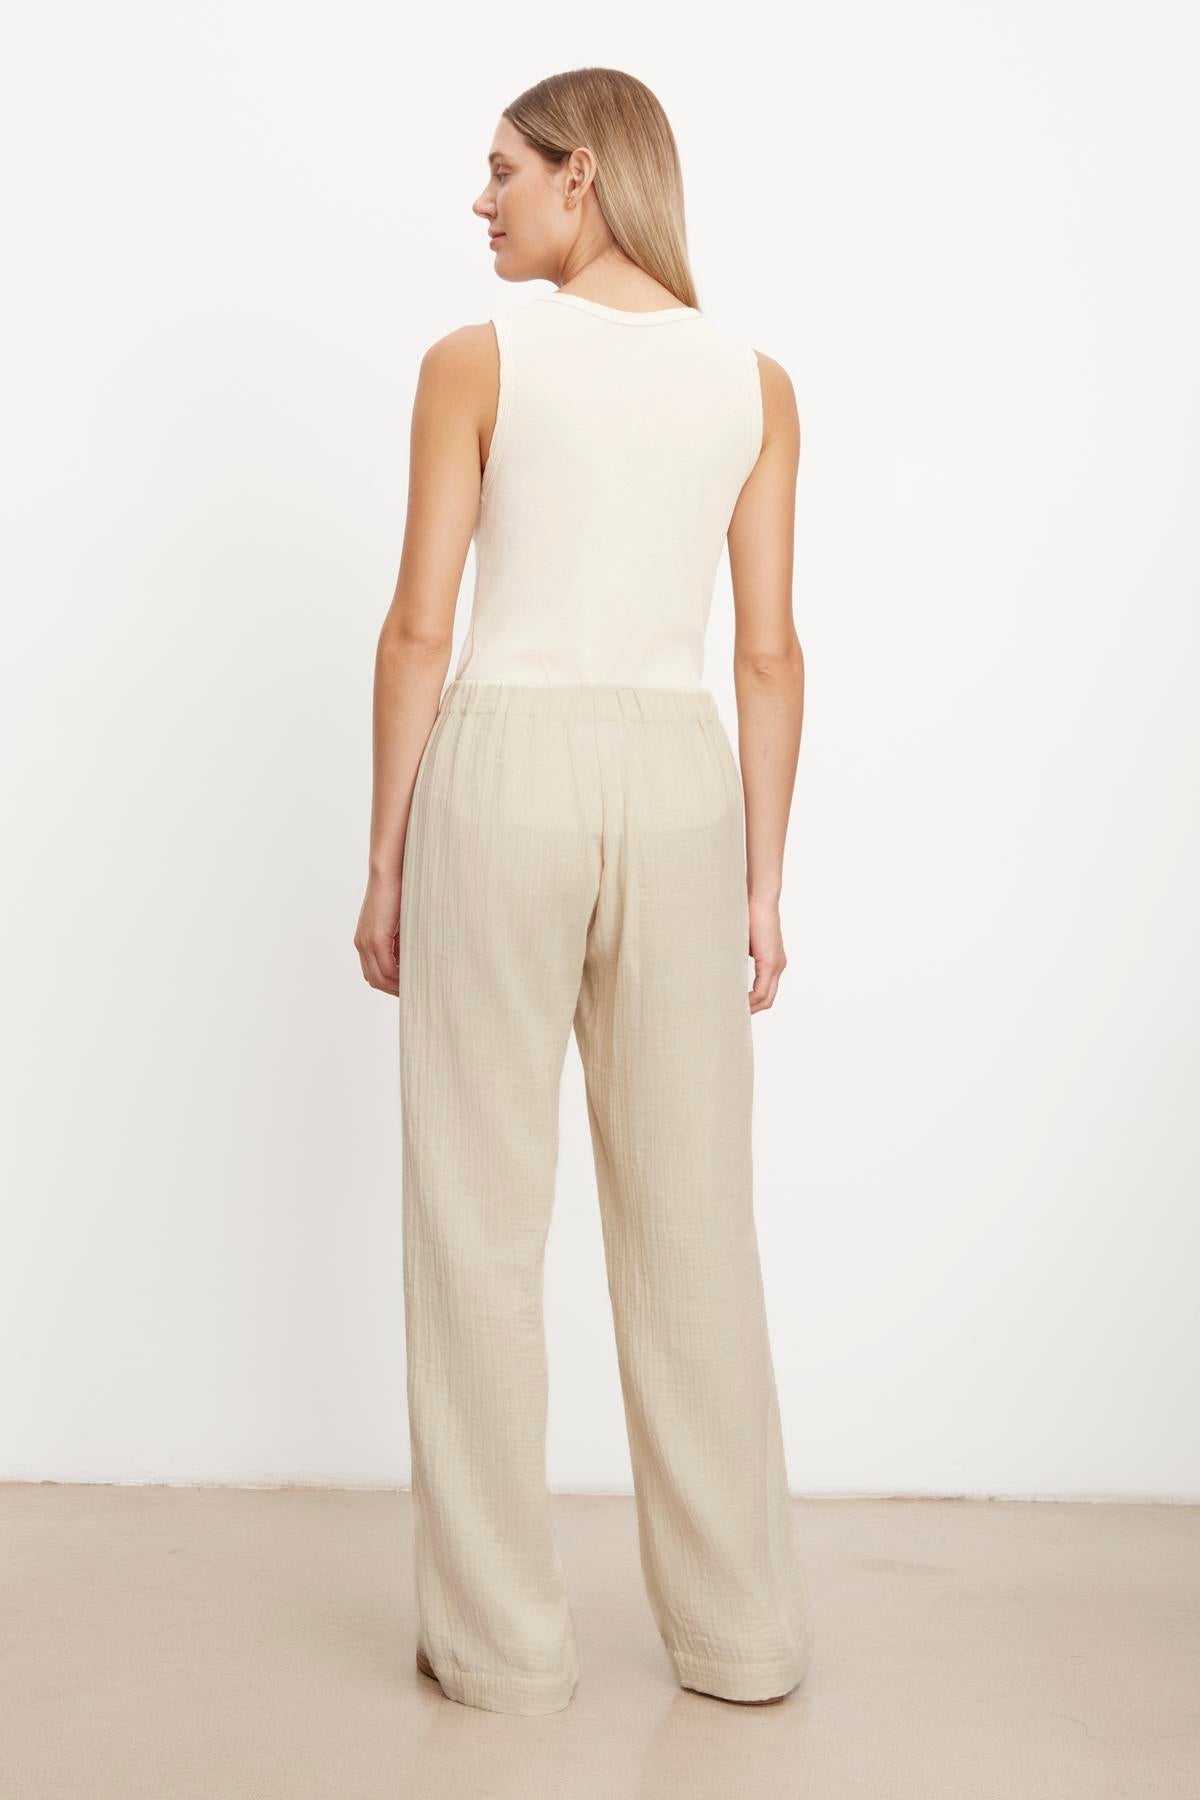   Woman standing in a neutral position wearing a sleeveless top and beige, lightweight Velvet by Graham & Spencer JERRY COTTON GAUZE PANT trousers with an elastic waistband against a plain background. 